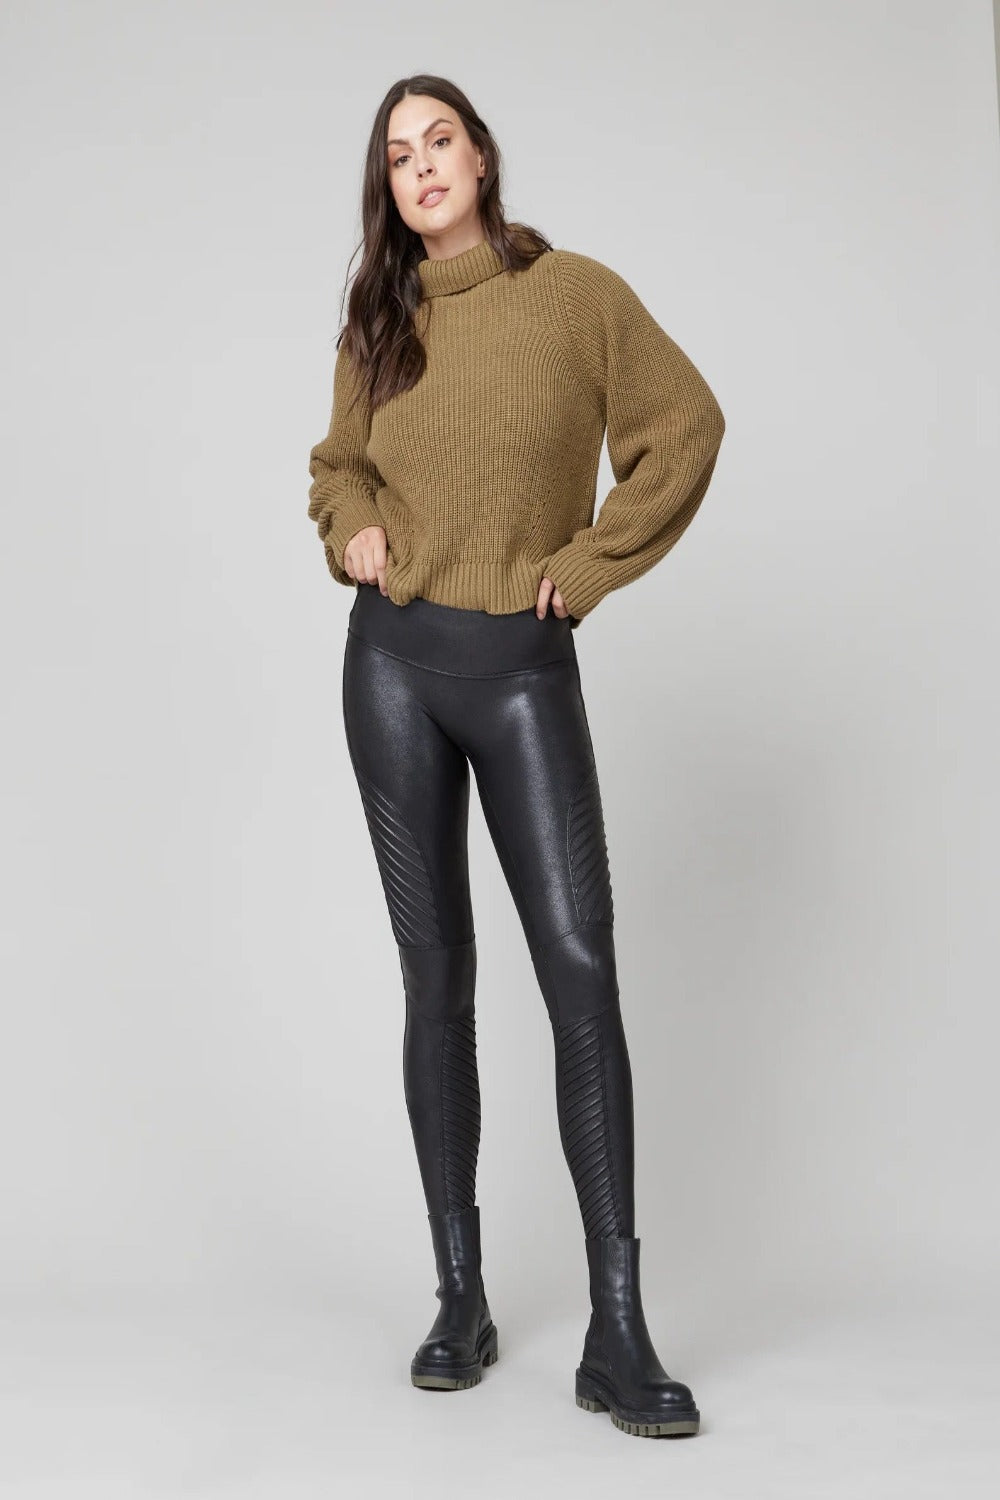 Spanx Mama faux leather leggings in black